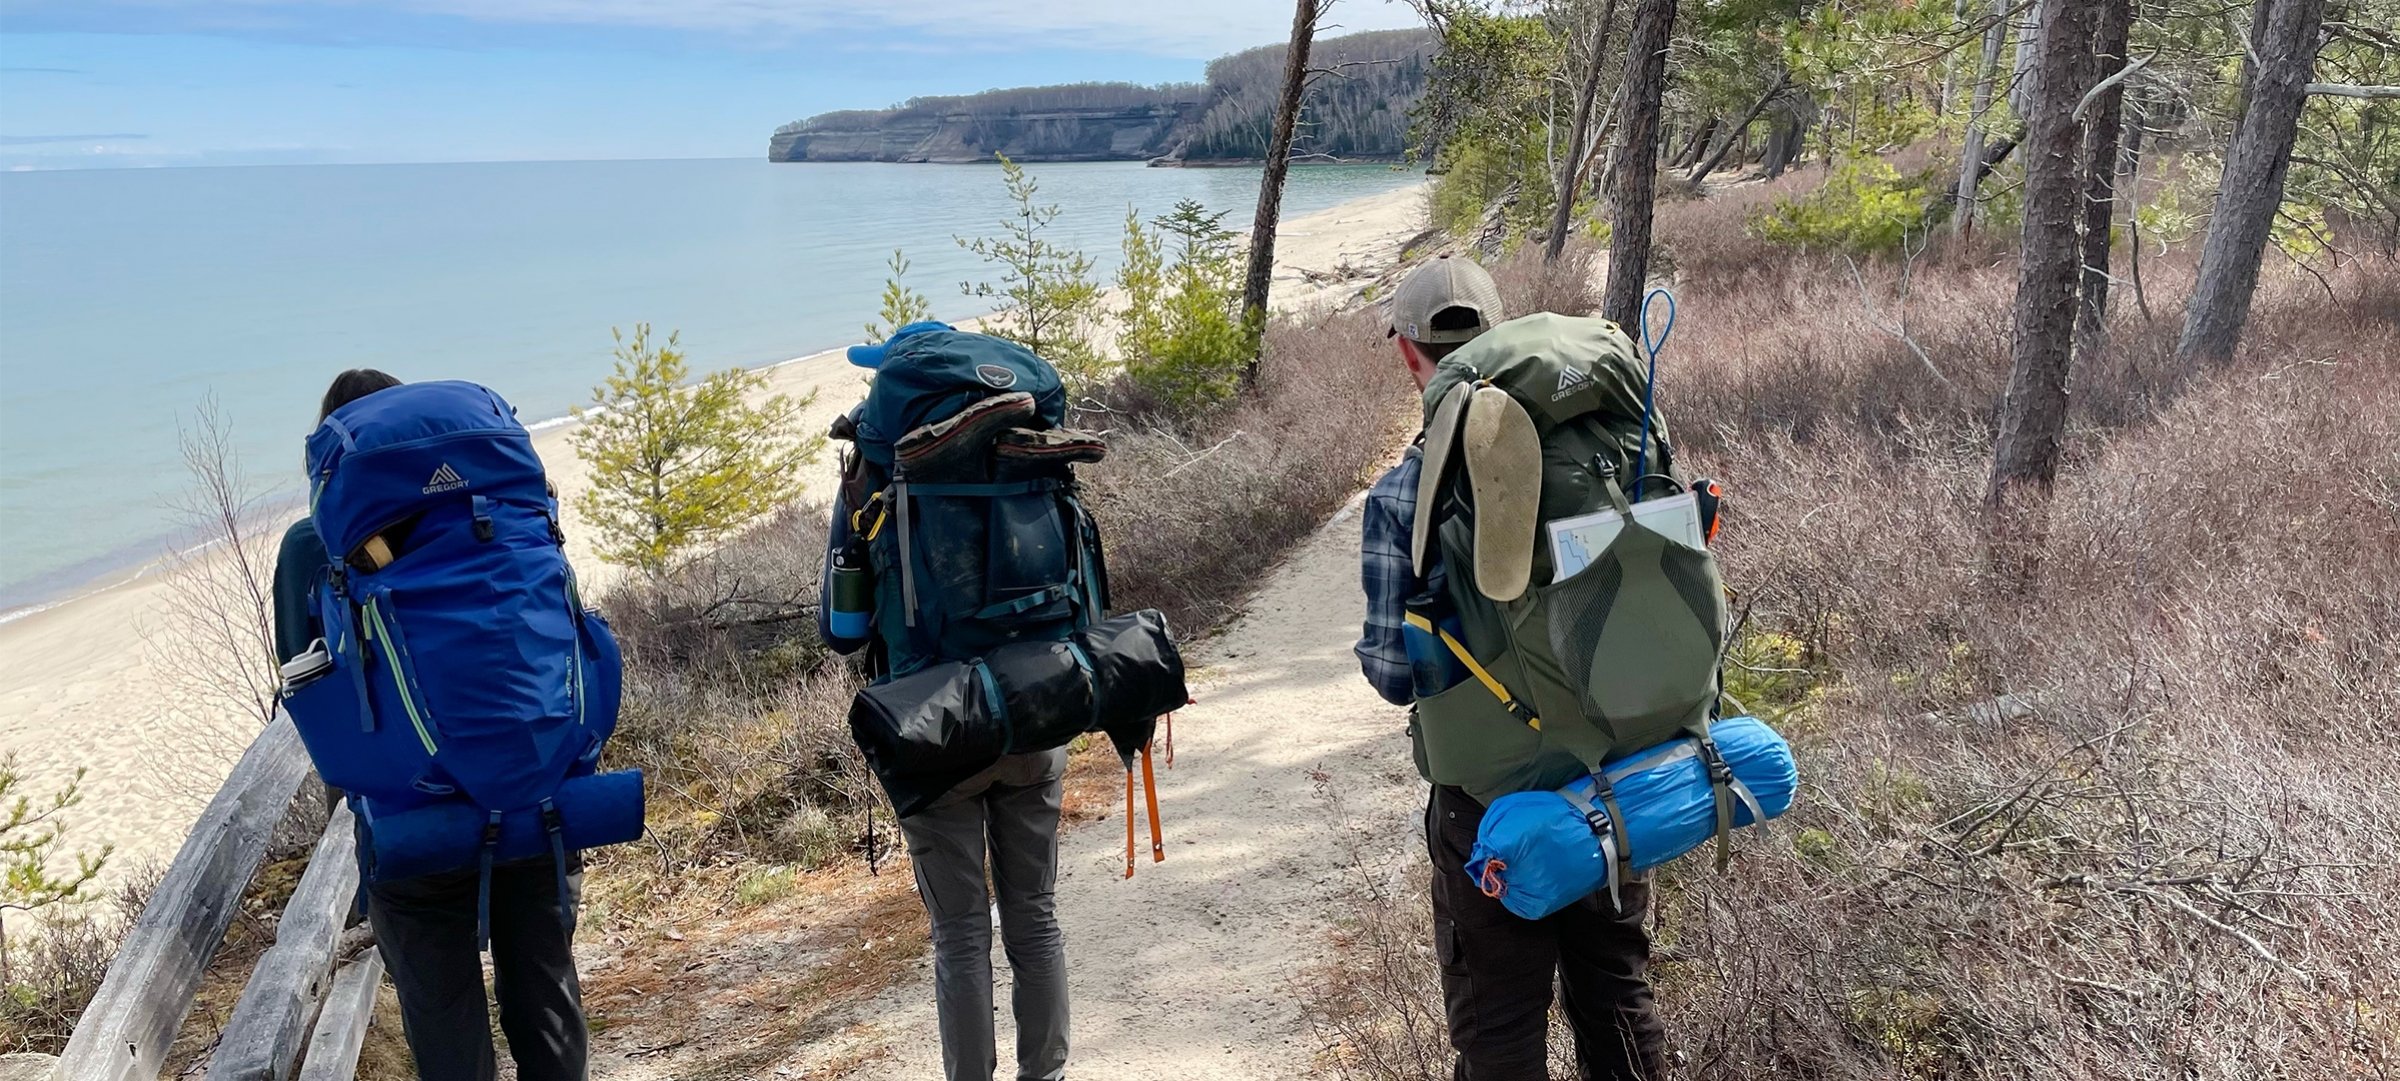 Three people with hiking backpacks looking out over a beach and water.